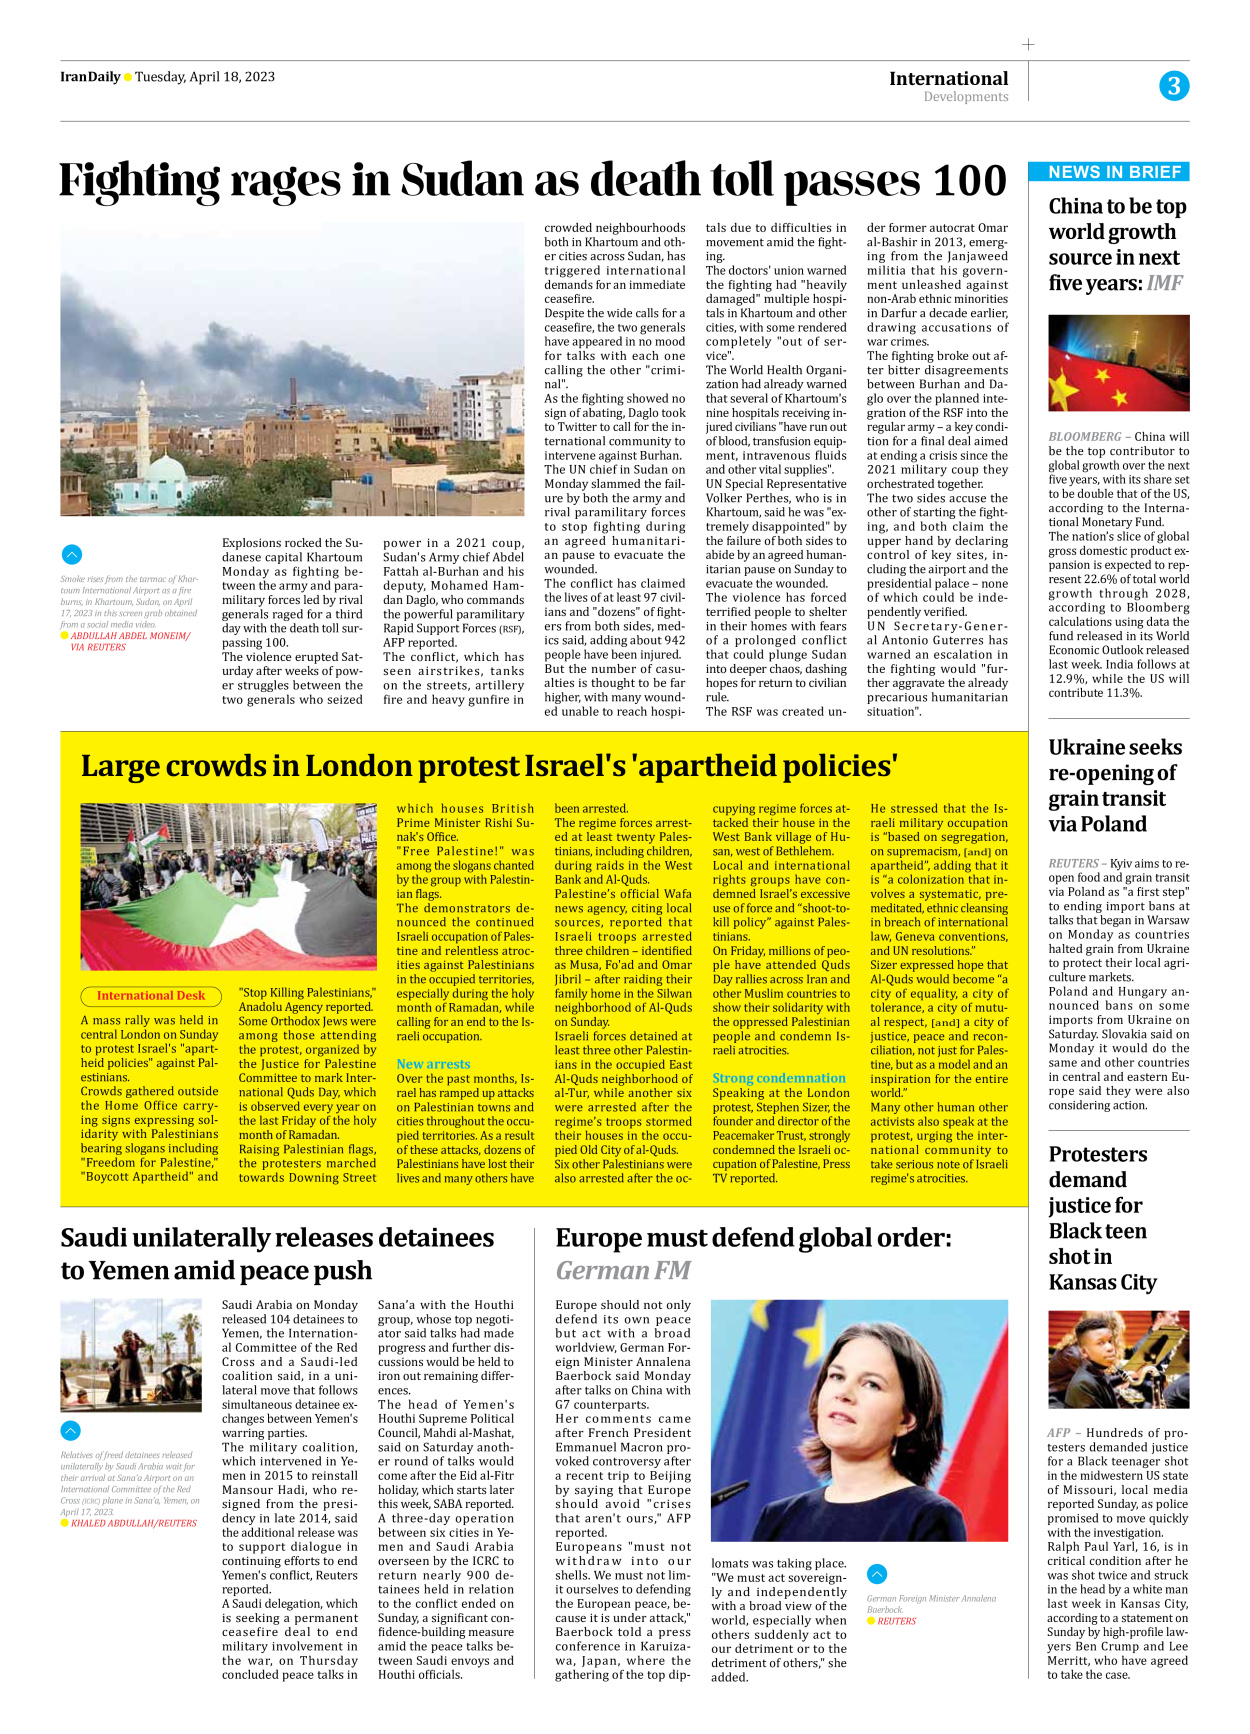 Iran Daily - Number Seven Thousand Two Hundred and Seventy One - 18 April 2023 - Page 3